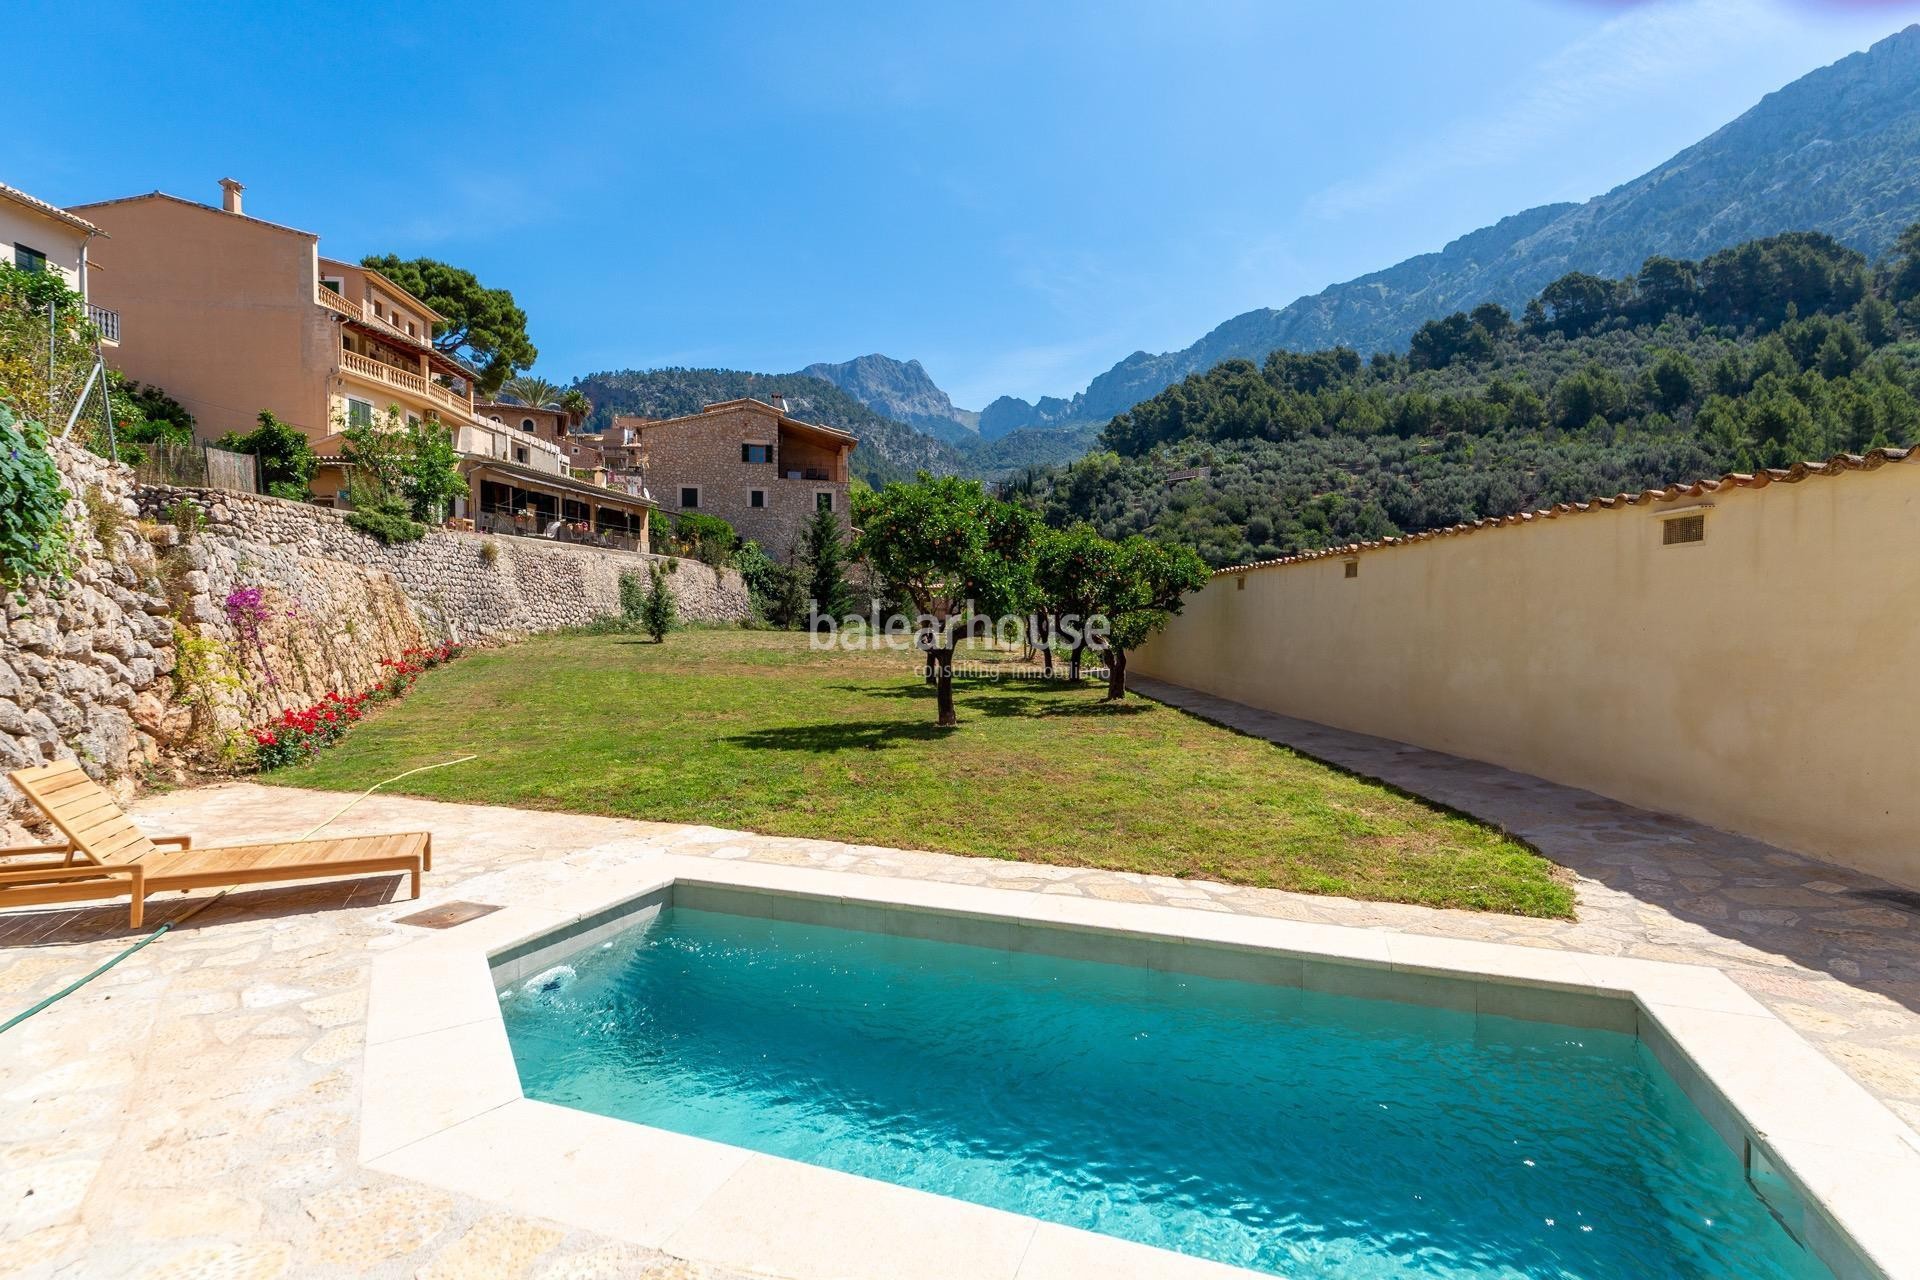 Excellent new villa in Fornalutx with pool and stunning views of the Tramuntana